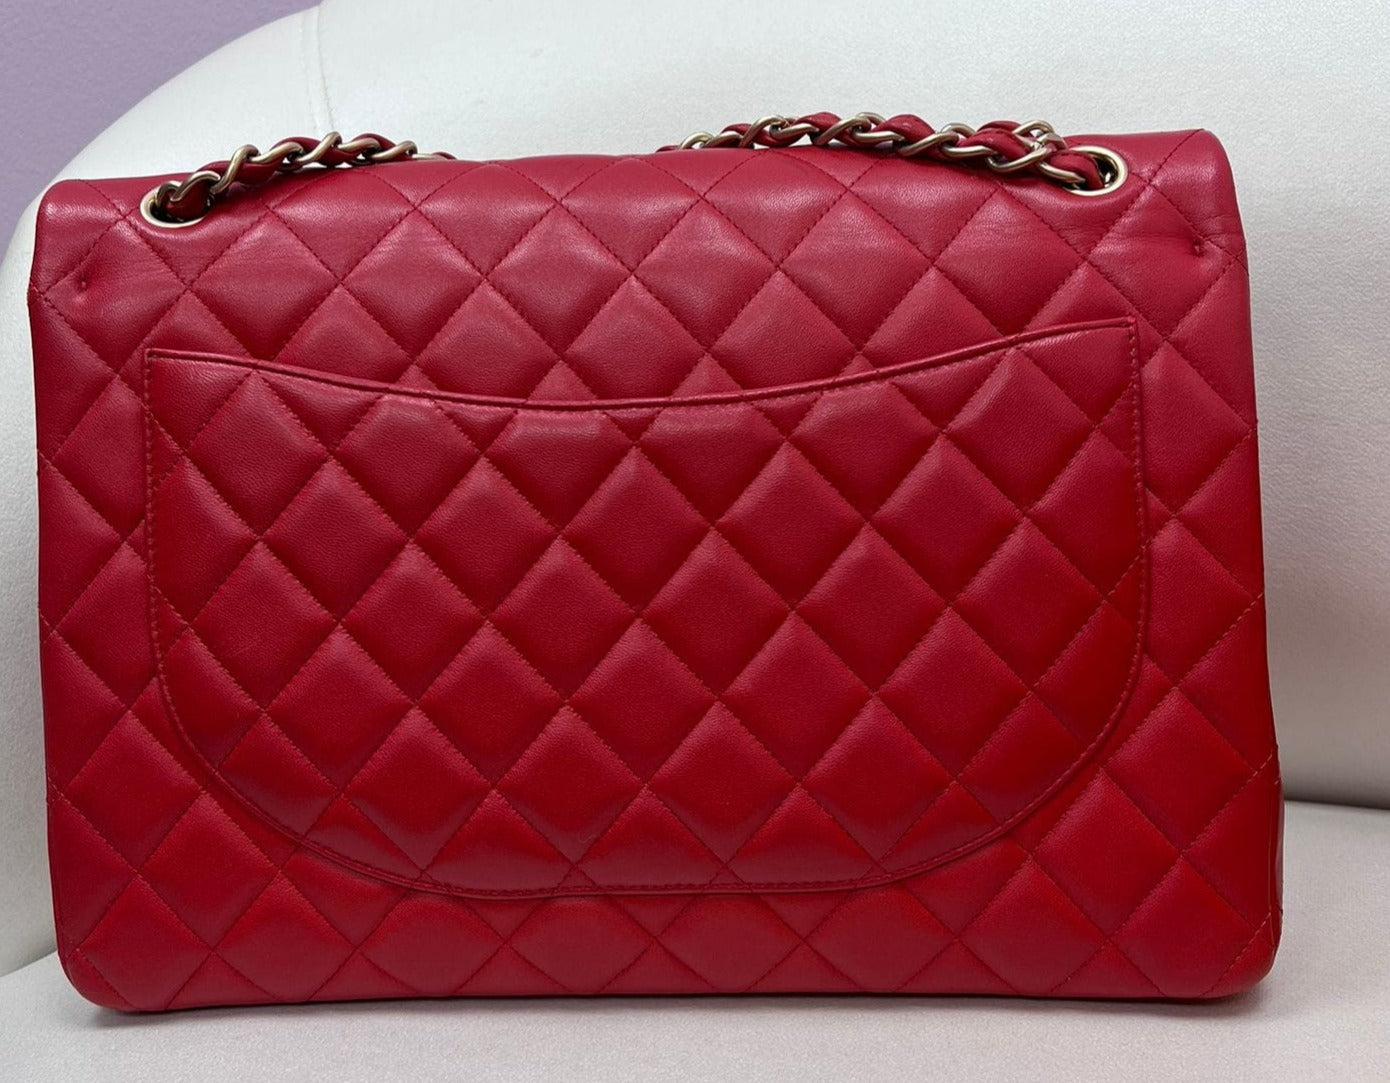 Chanel Chanel Lambskin Maxi Red SYL1077